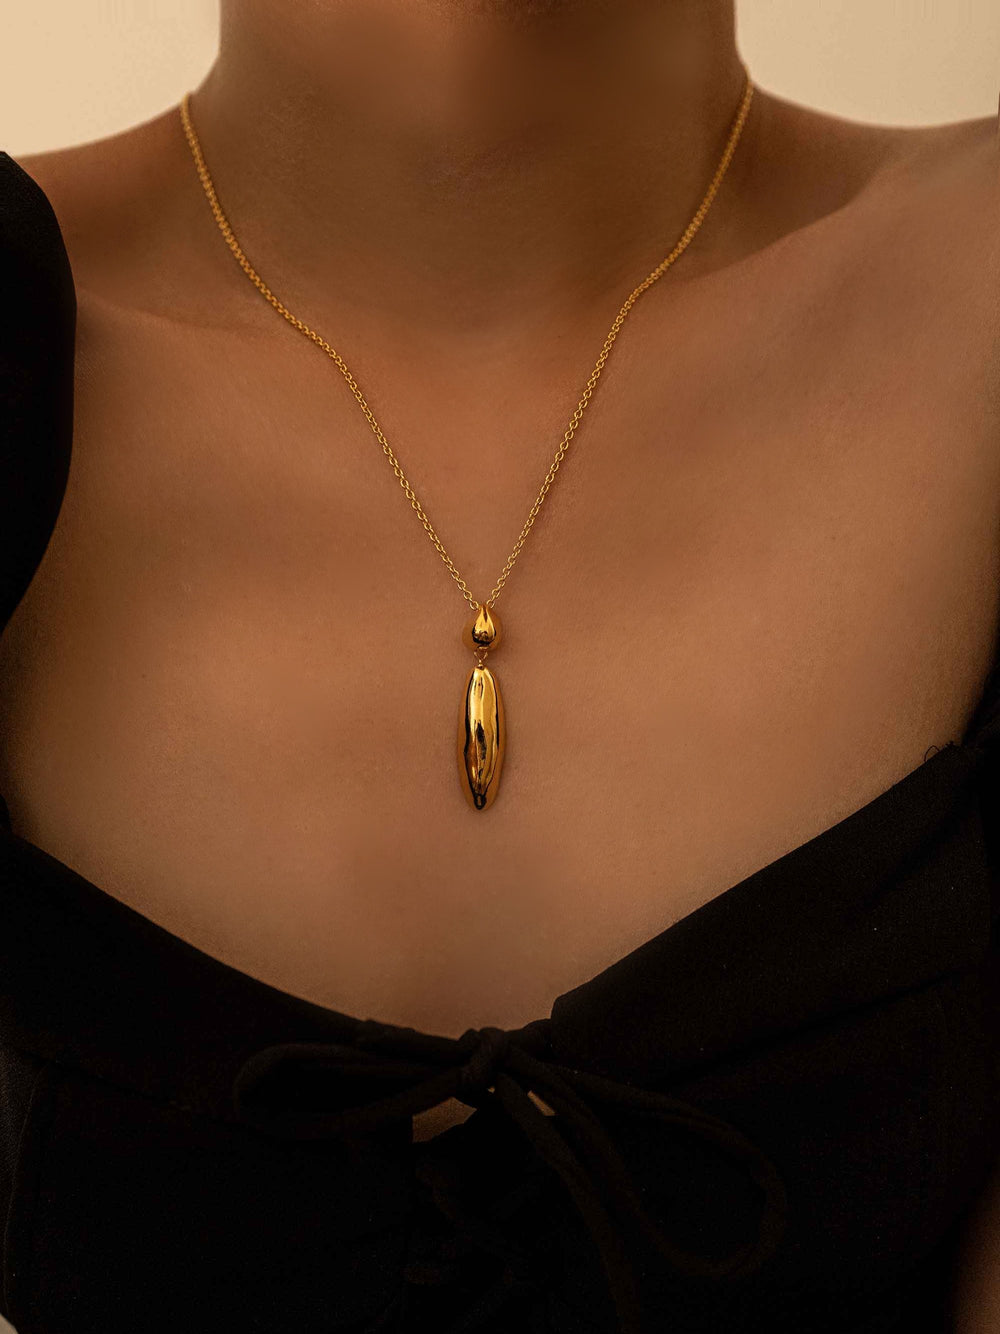 A gold necklace with a simple pendant